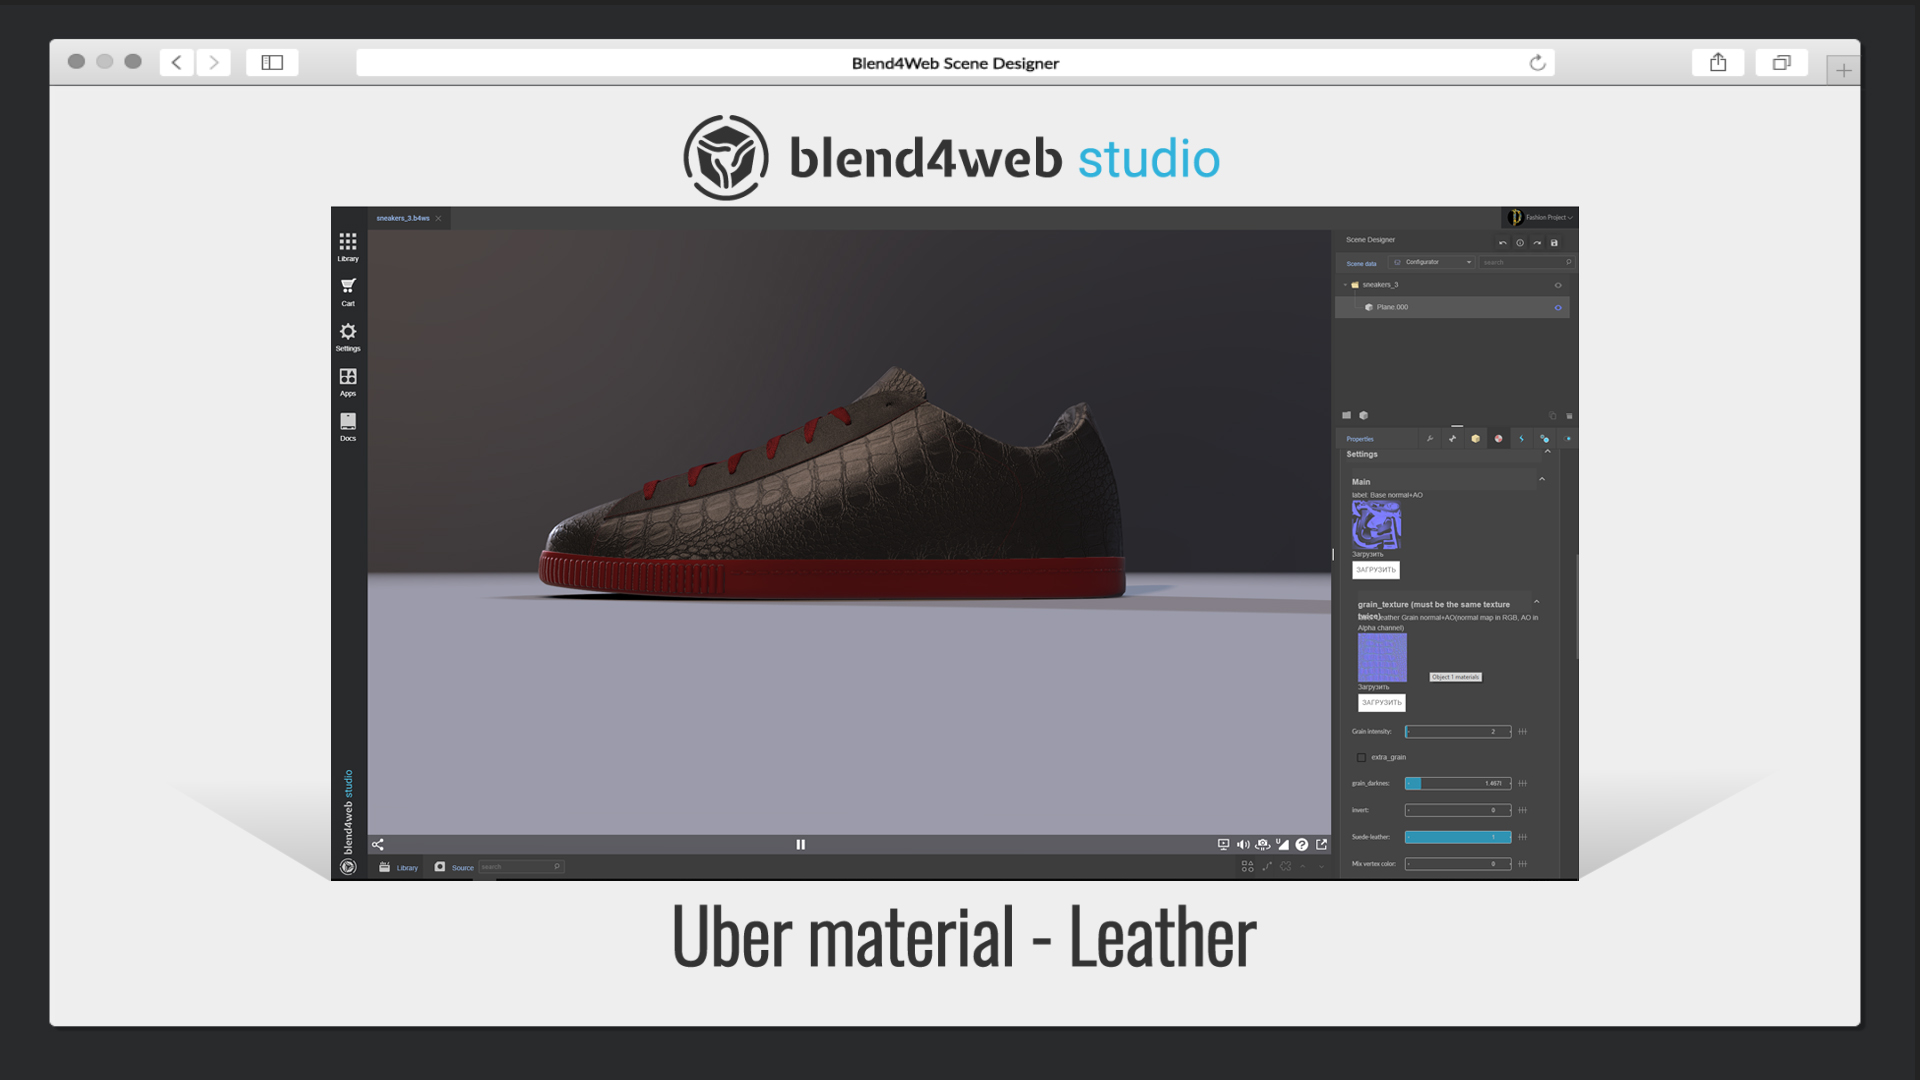 Blend4Web Studio: Uber material - Leather (patent leather, nubuck, suede, prints)